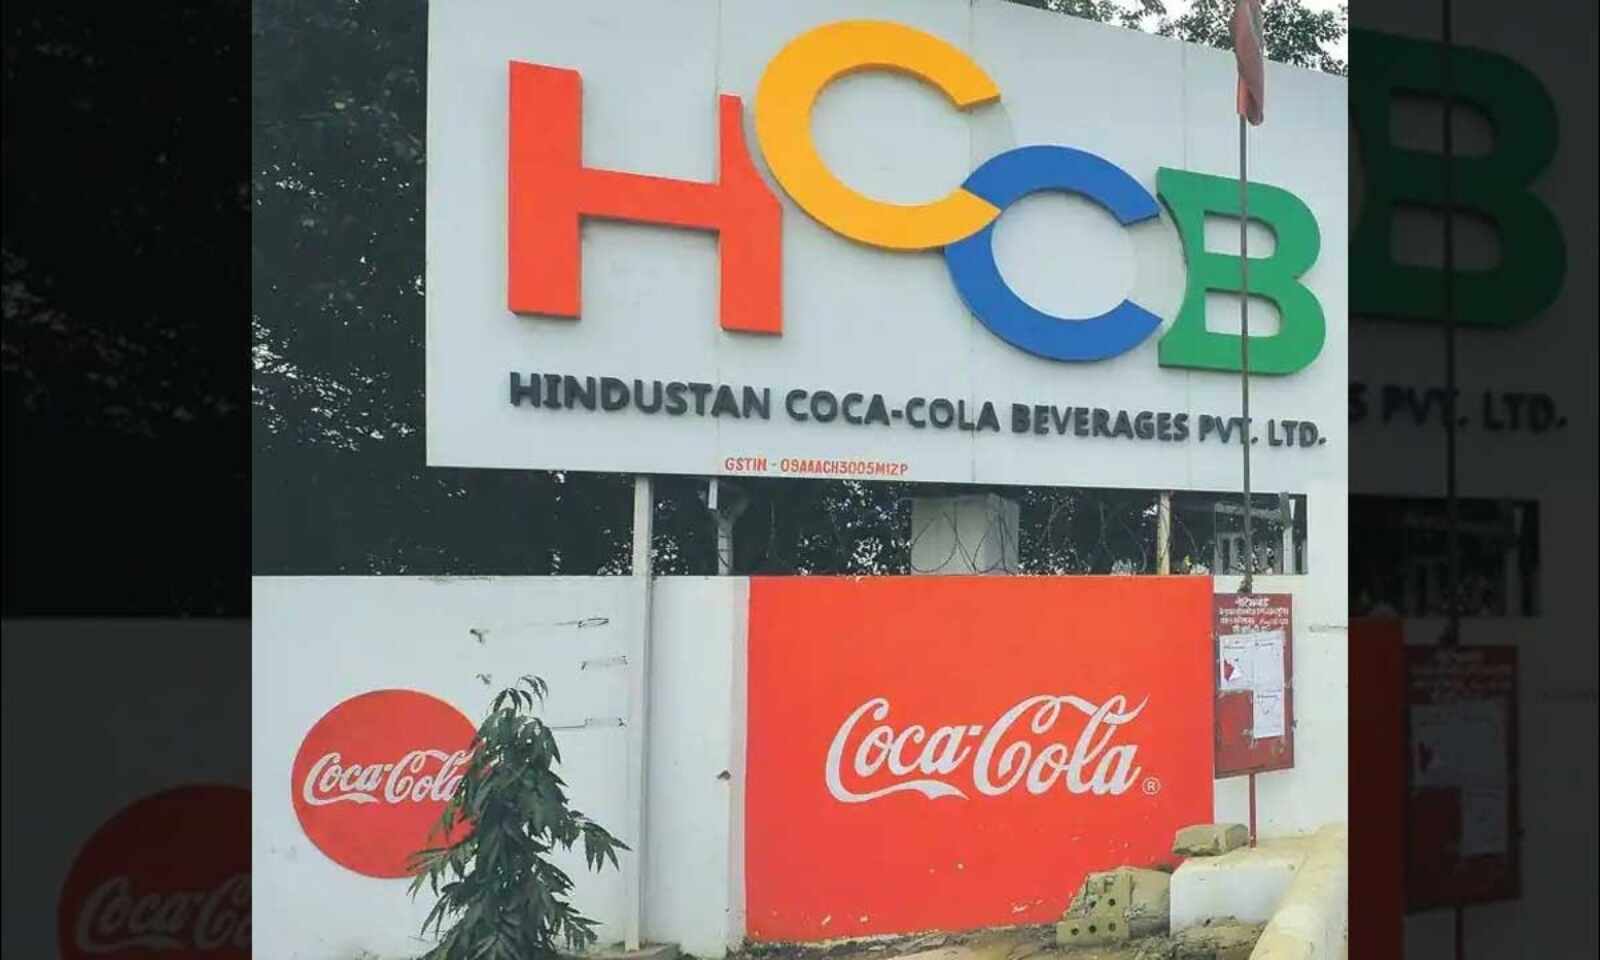 Hindustan Coca-Cola Beverages Pvt. Ltd., a Great Place to Work